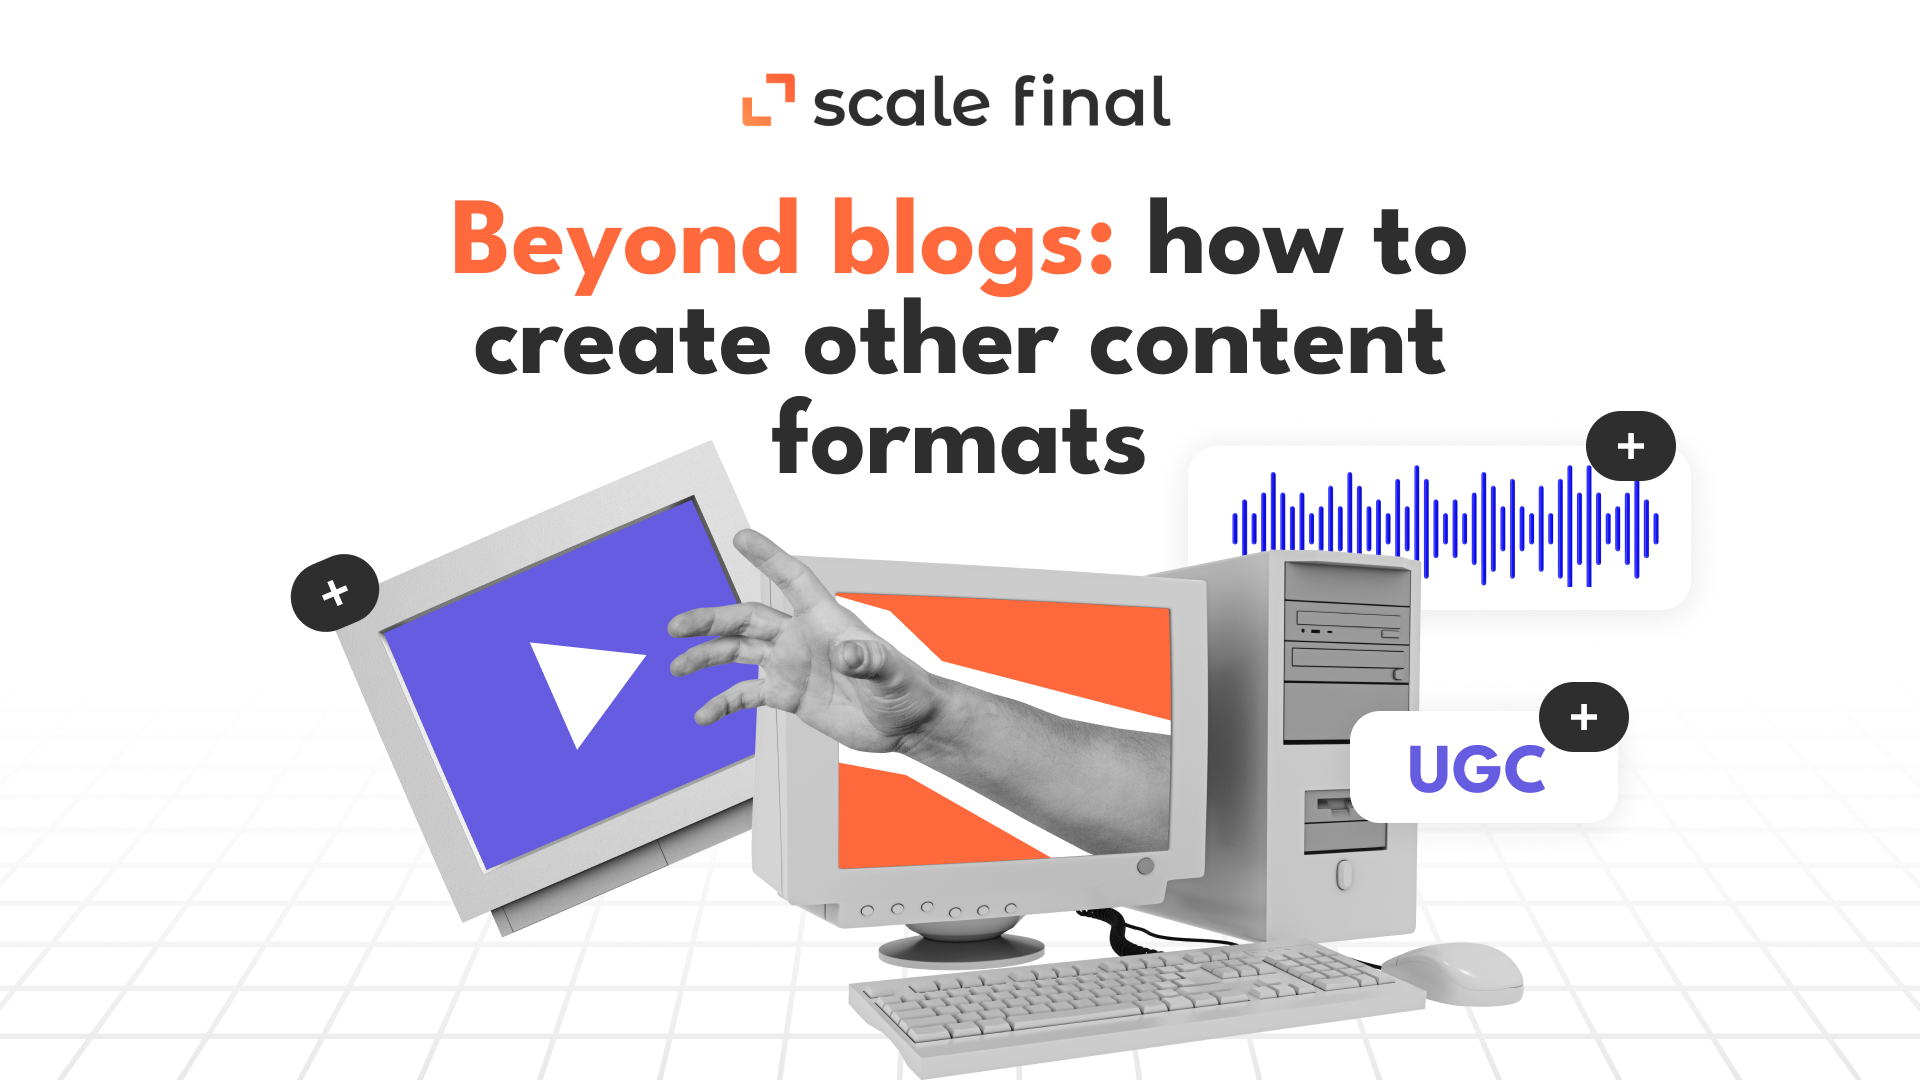 Beyond blogs: how to create other content formats